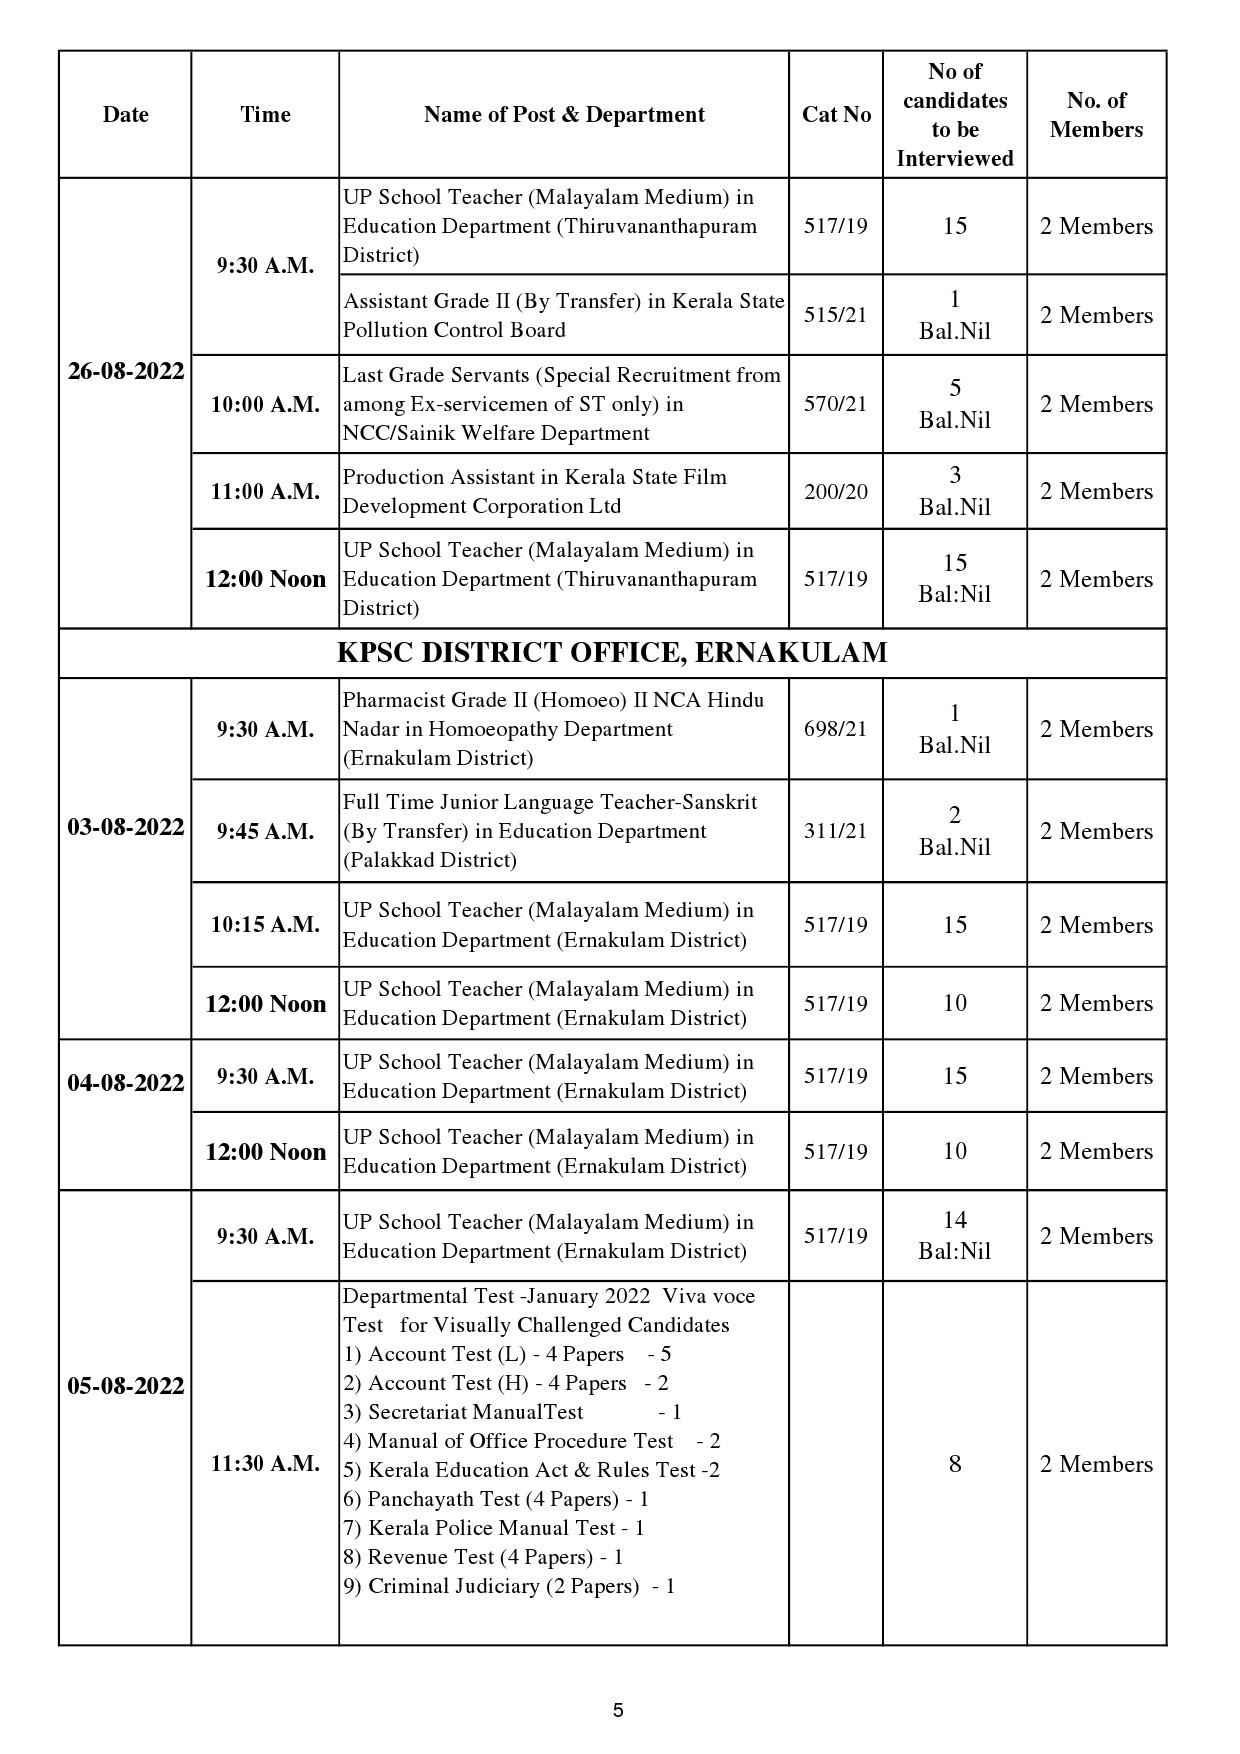 Interview Programme For The Month Of August 2022 - Notification Image 5